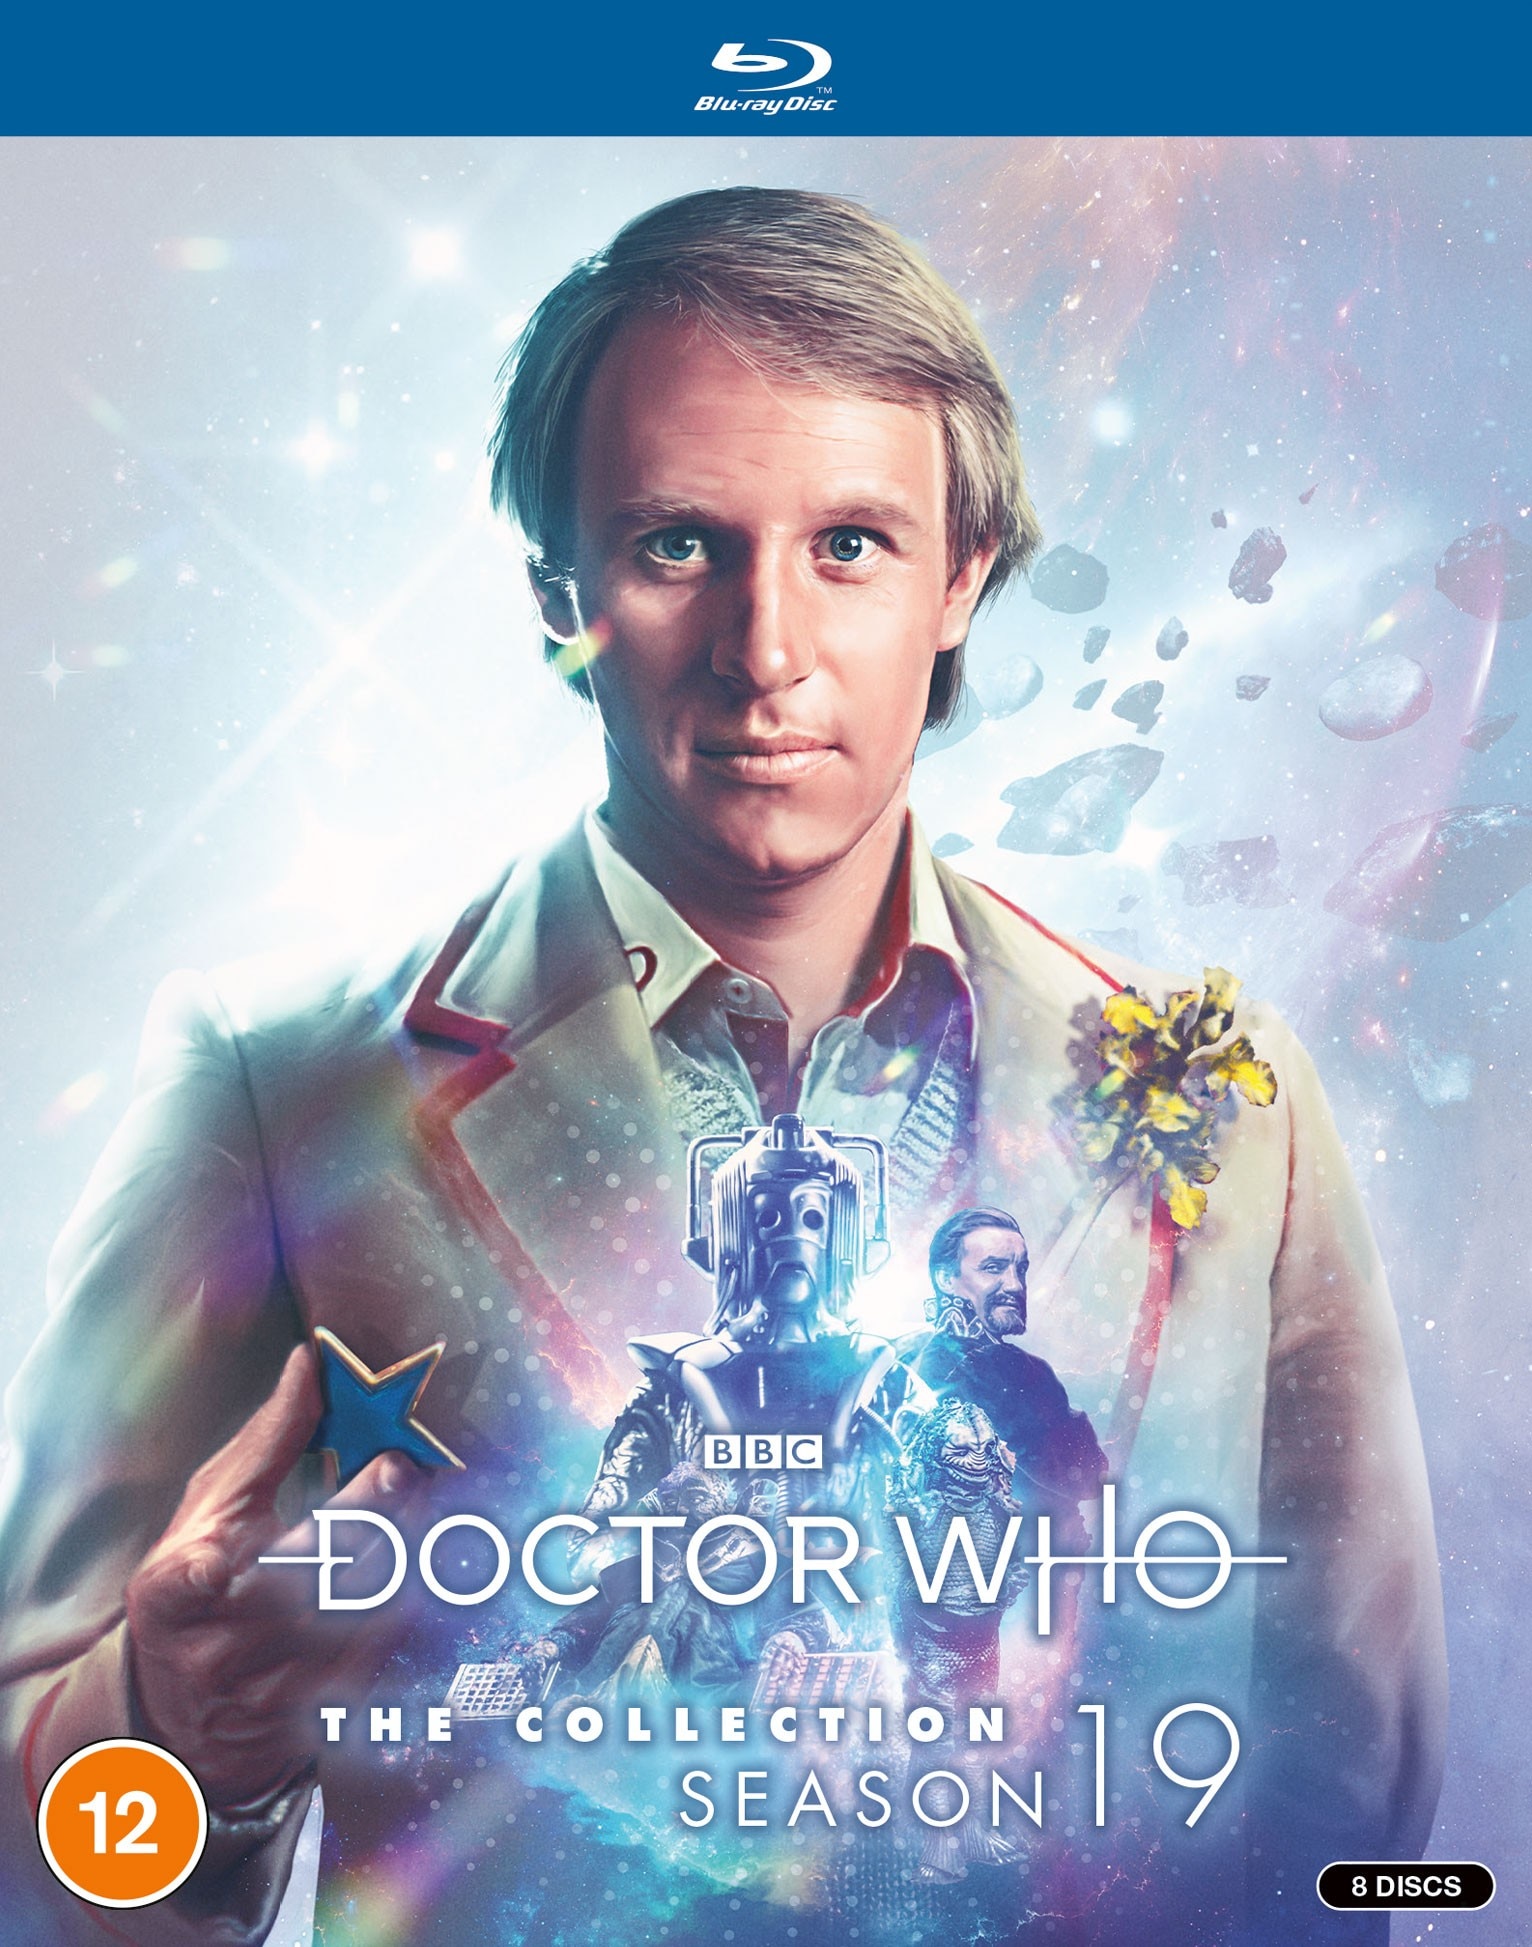 Introduction to the 4th Doctor DVD (HMV Exclusive) – Merchandise Guide -  The Doctor Who Site